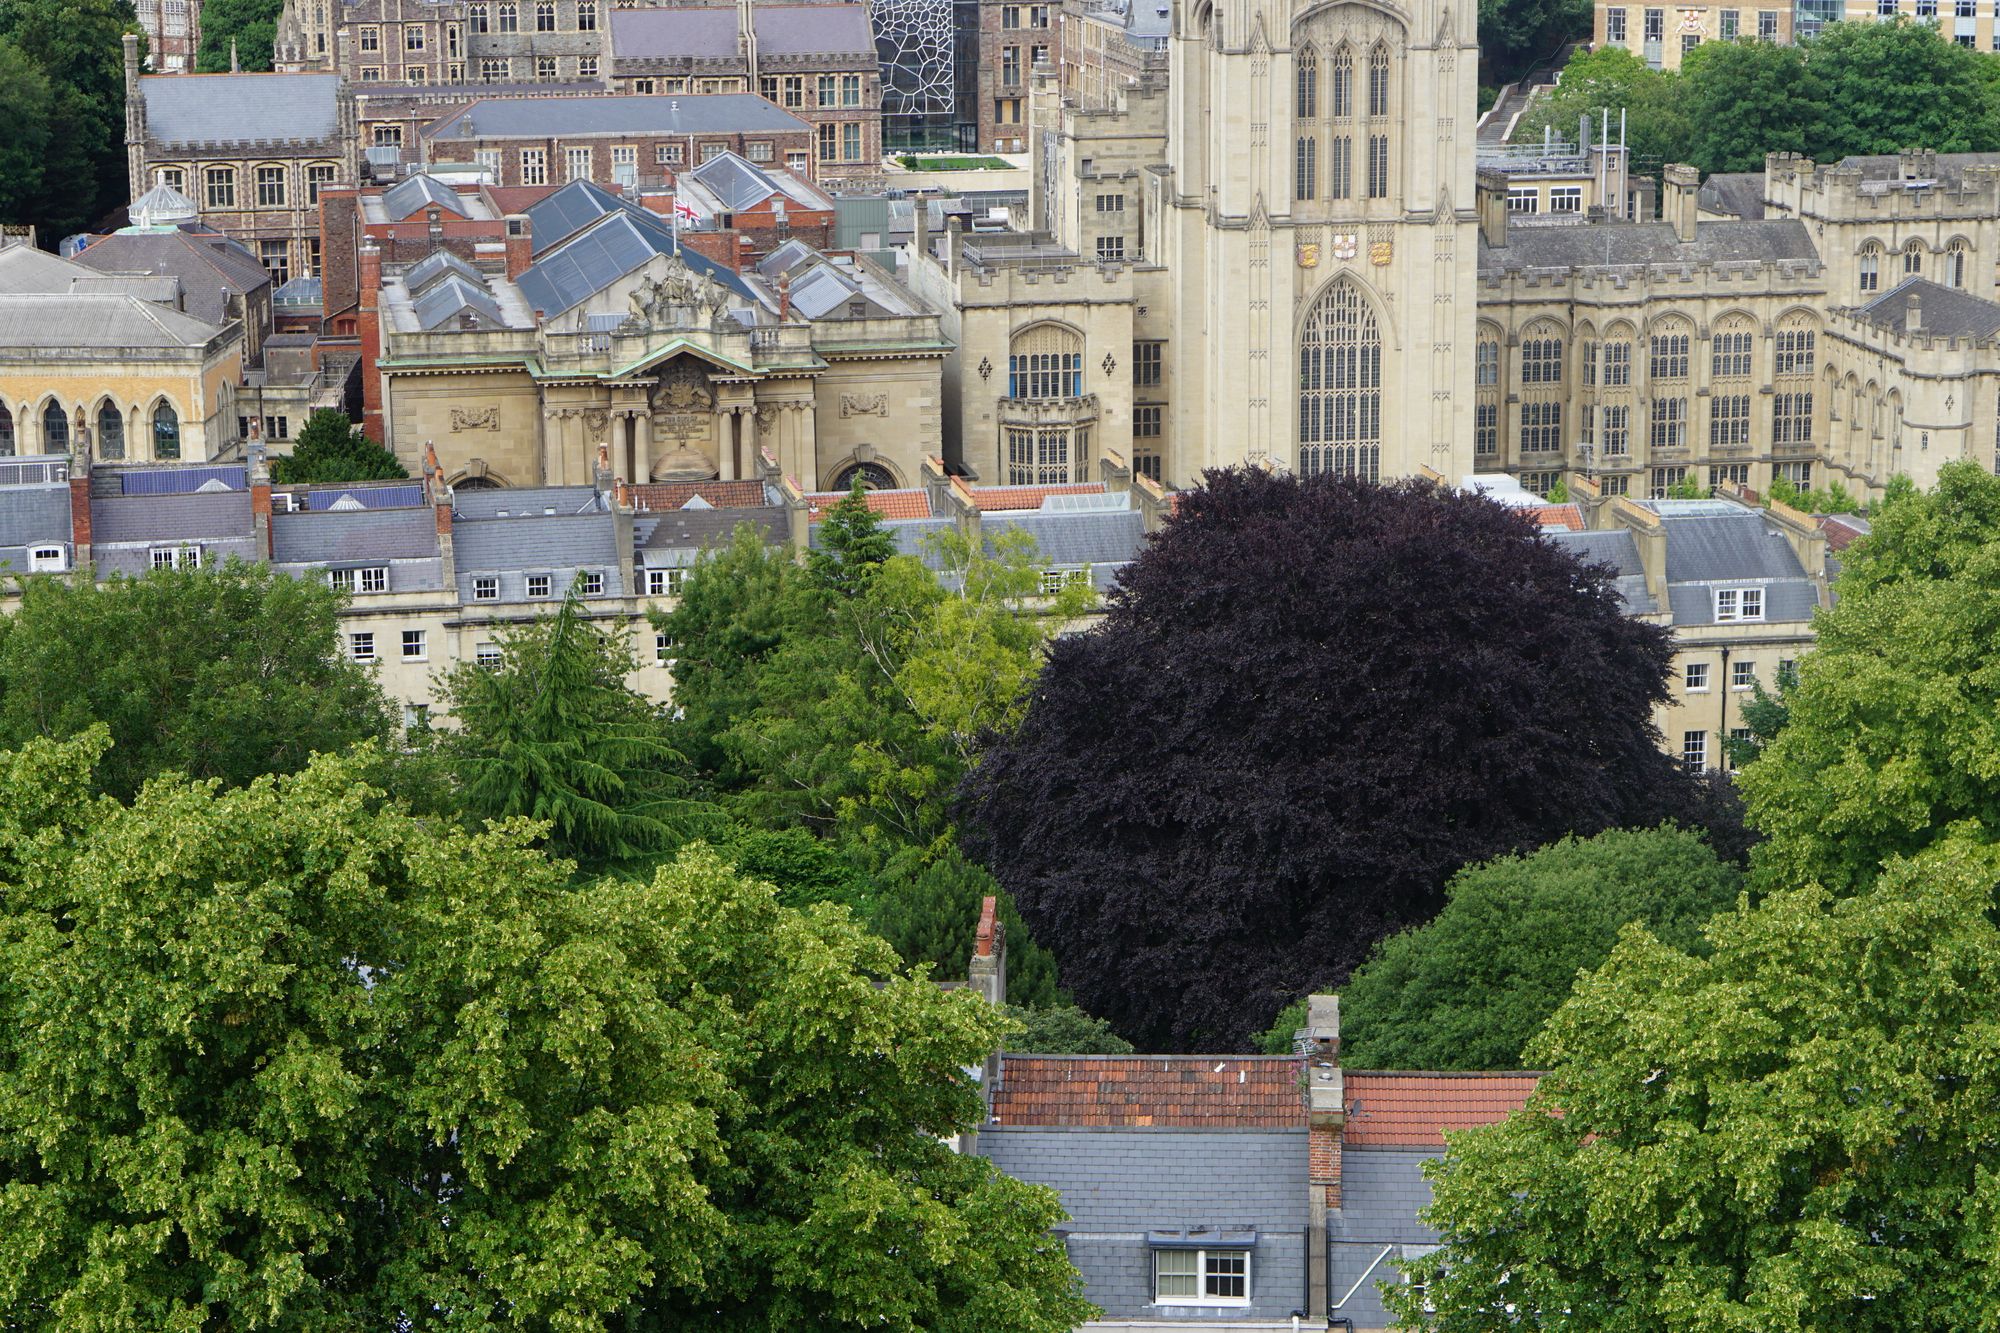 From above, tree canopies with buildings rising up between them—one beech tree has dark red foliage.